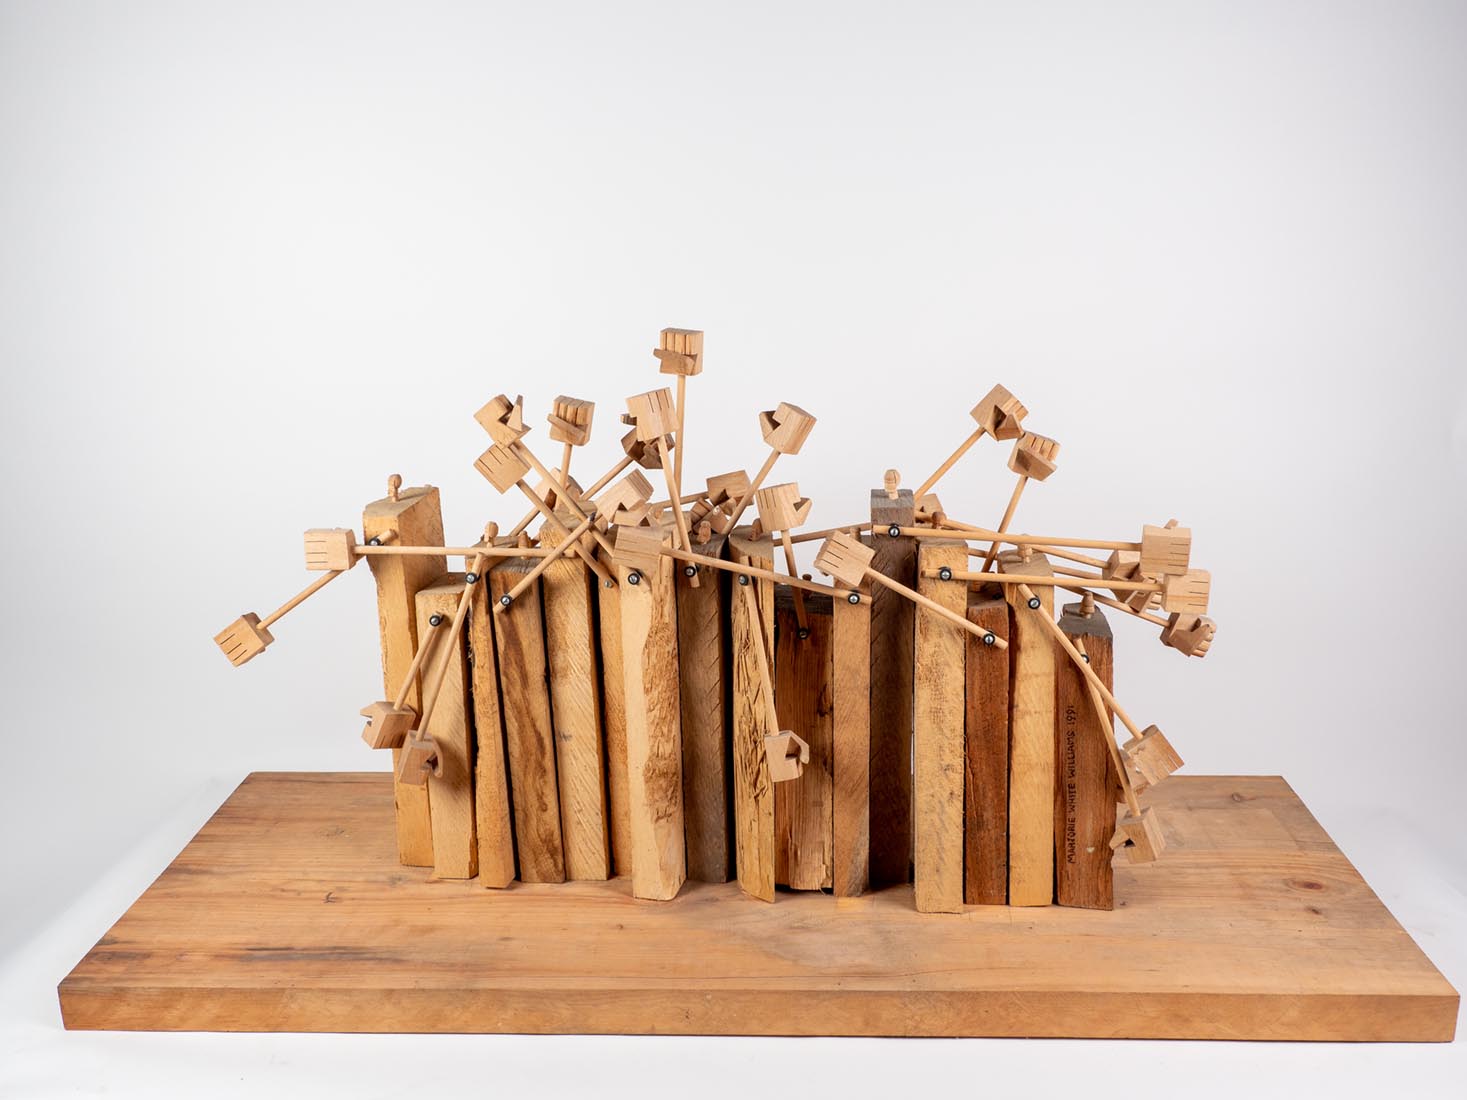 Power Pack wood sculpture by Marjorie White Williams